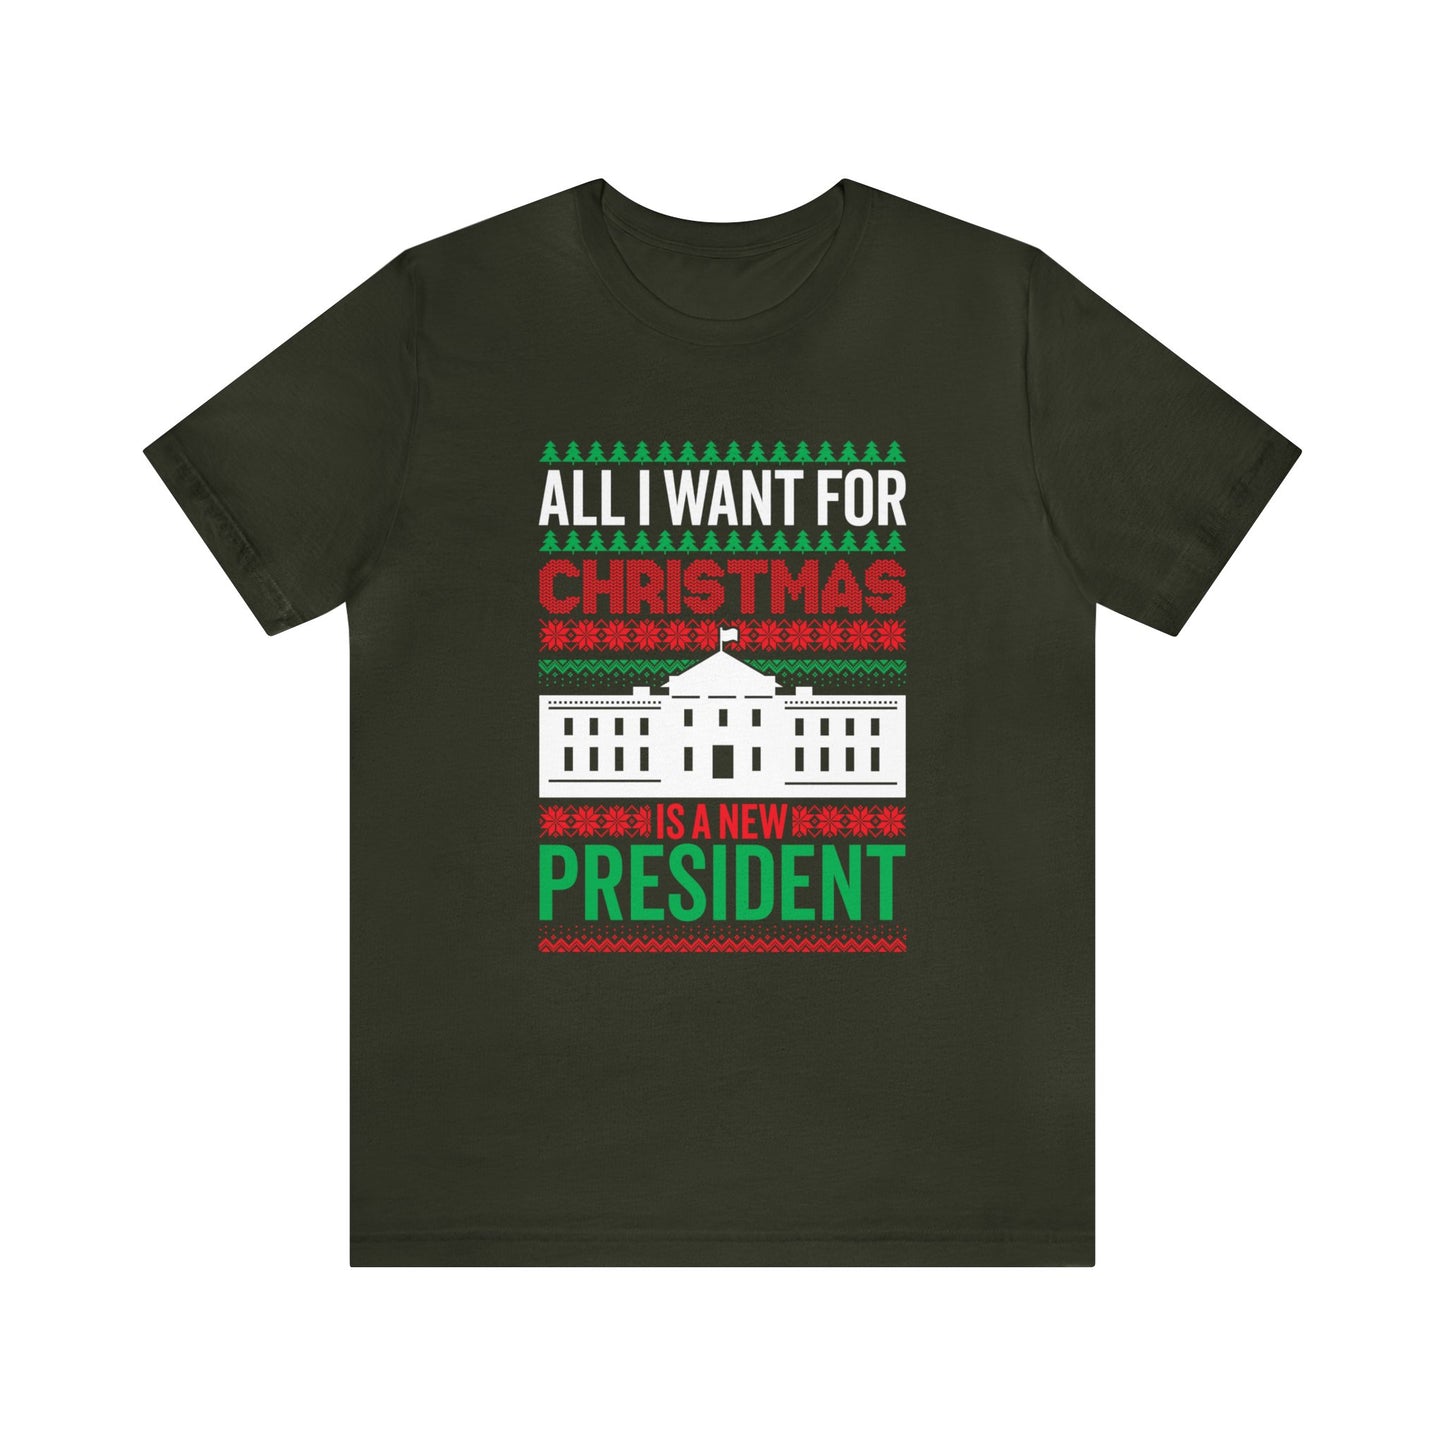 All I Want For Christmas is a New President Funny Christmas Tshirt Adult Unisex